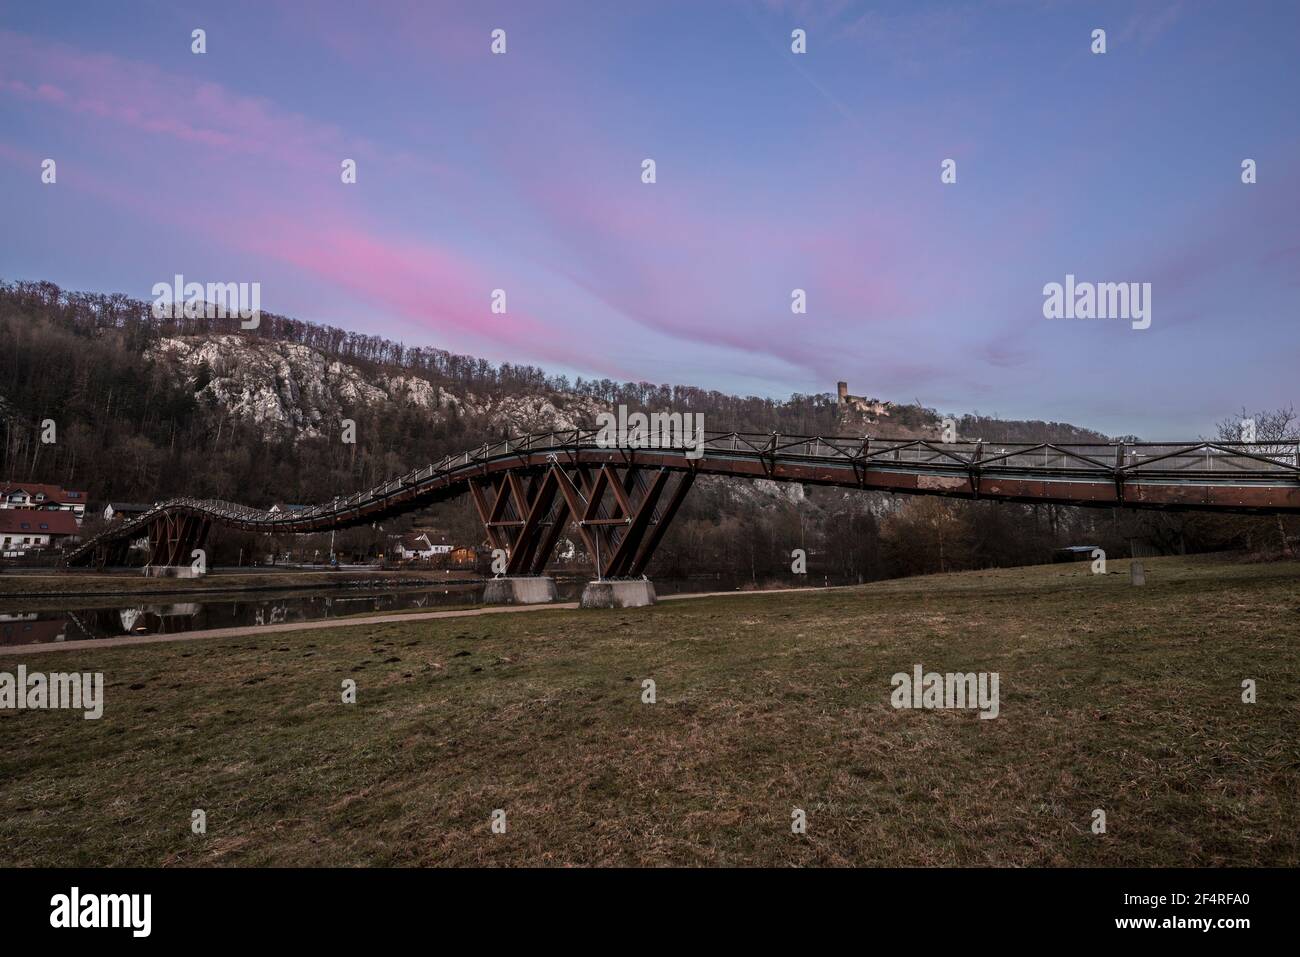 Tatzelwurm bridge near Markt Essing at blue hour after sunset with pink clouds in blue sky, Germany Stock Photo